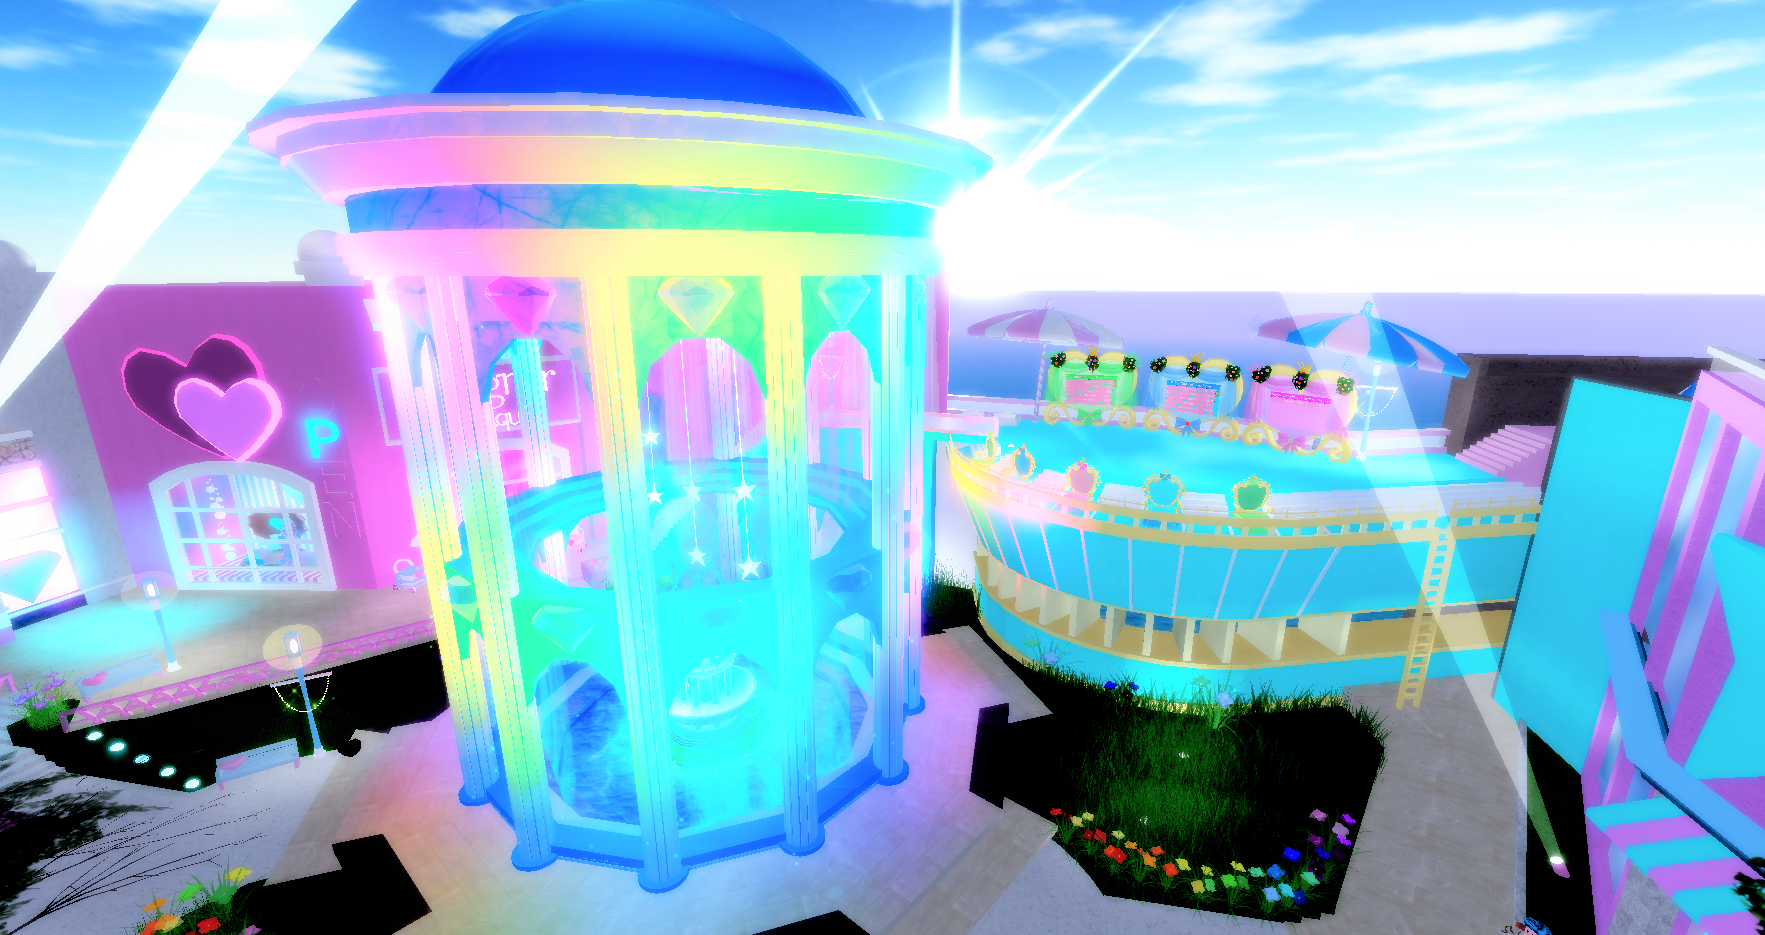 https://static.wikia.nocookie.net/royale-high/images/2/22/RobloxScreenShot20190626_115940722_%283%29.png/revision/latest?cb=20190626173301